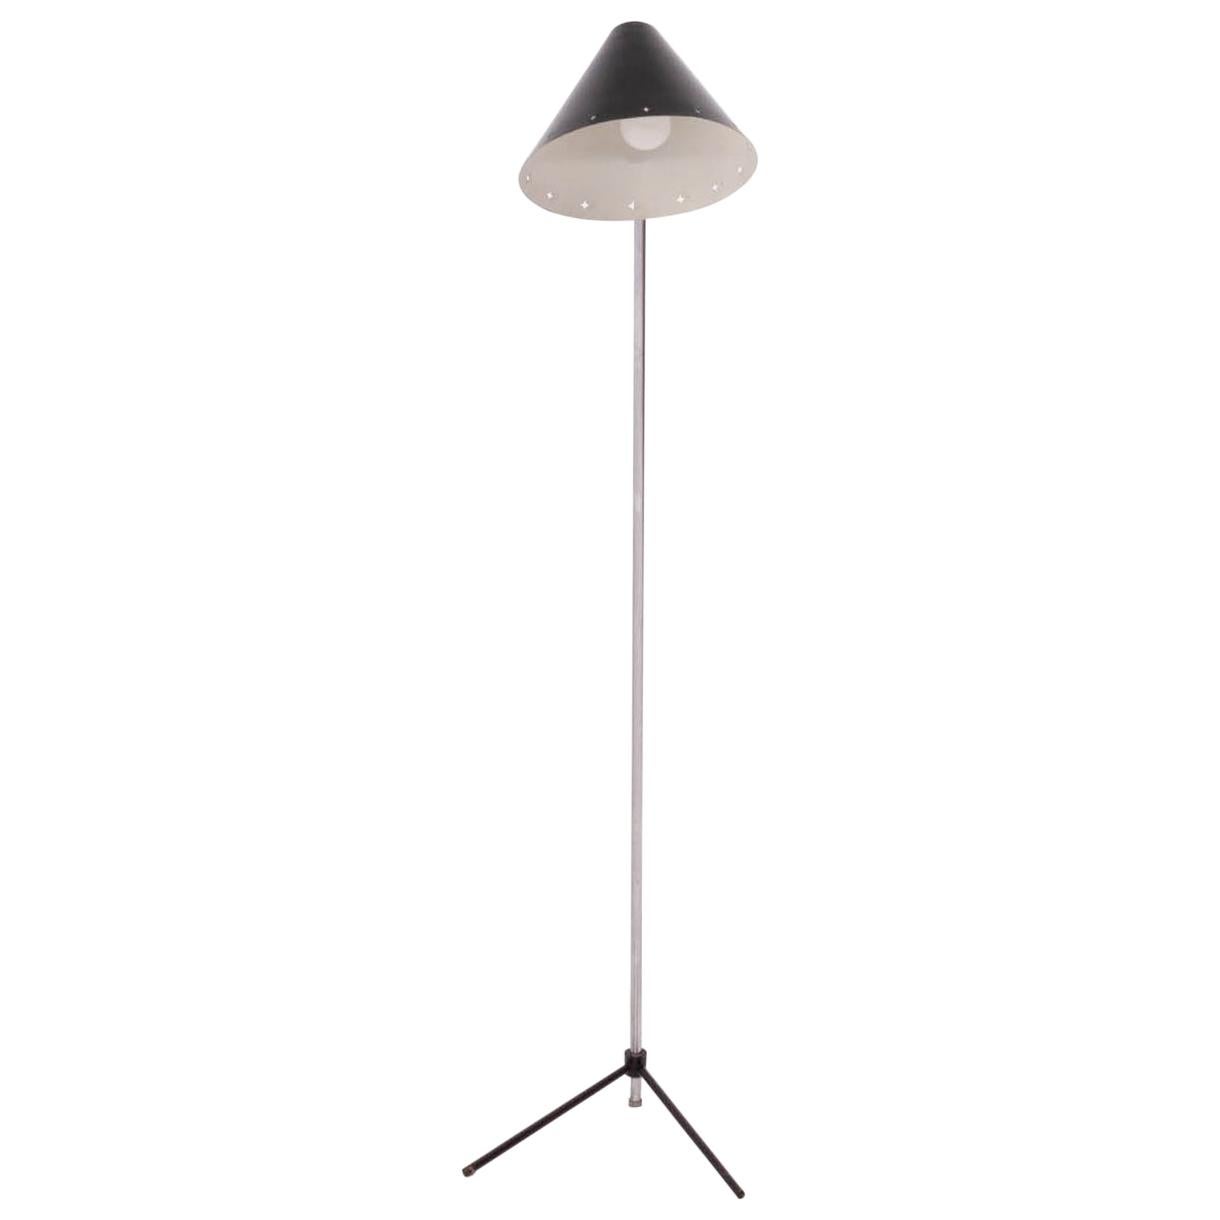 Designed by H. Busquet for Hala Zeist in 1954, this rare Pinocchio floor lamp features a black enamel shade with star-shaped cut-outs around the edge.

The mid century lamp has a metal stand with black angled feet, and can be turned on and off